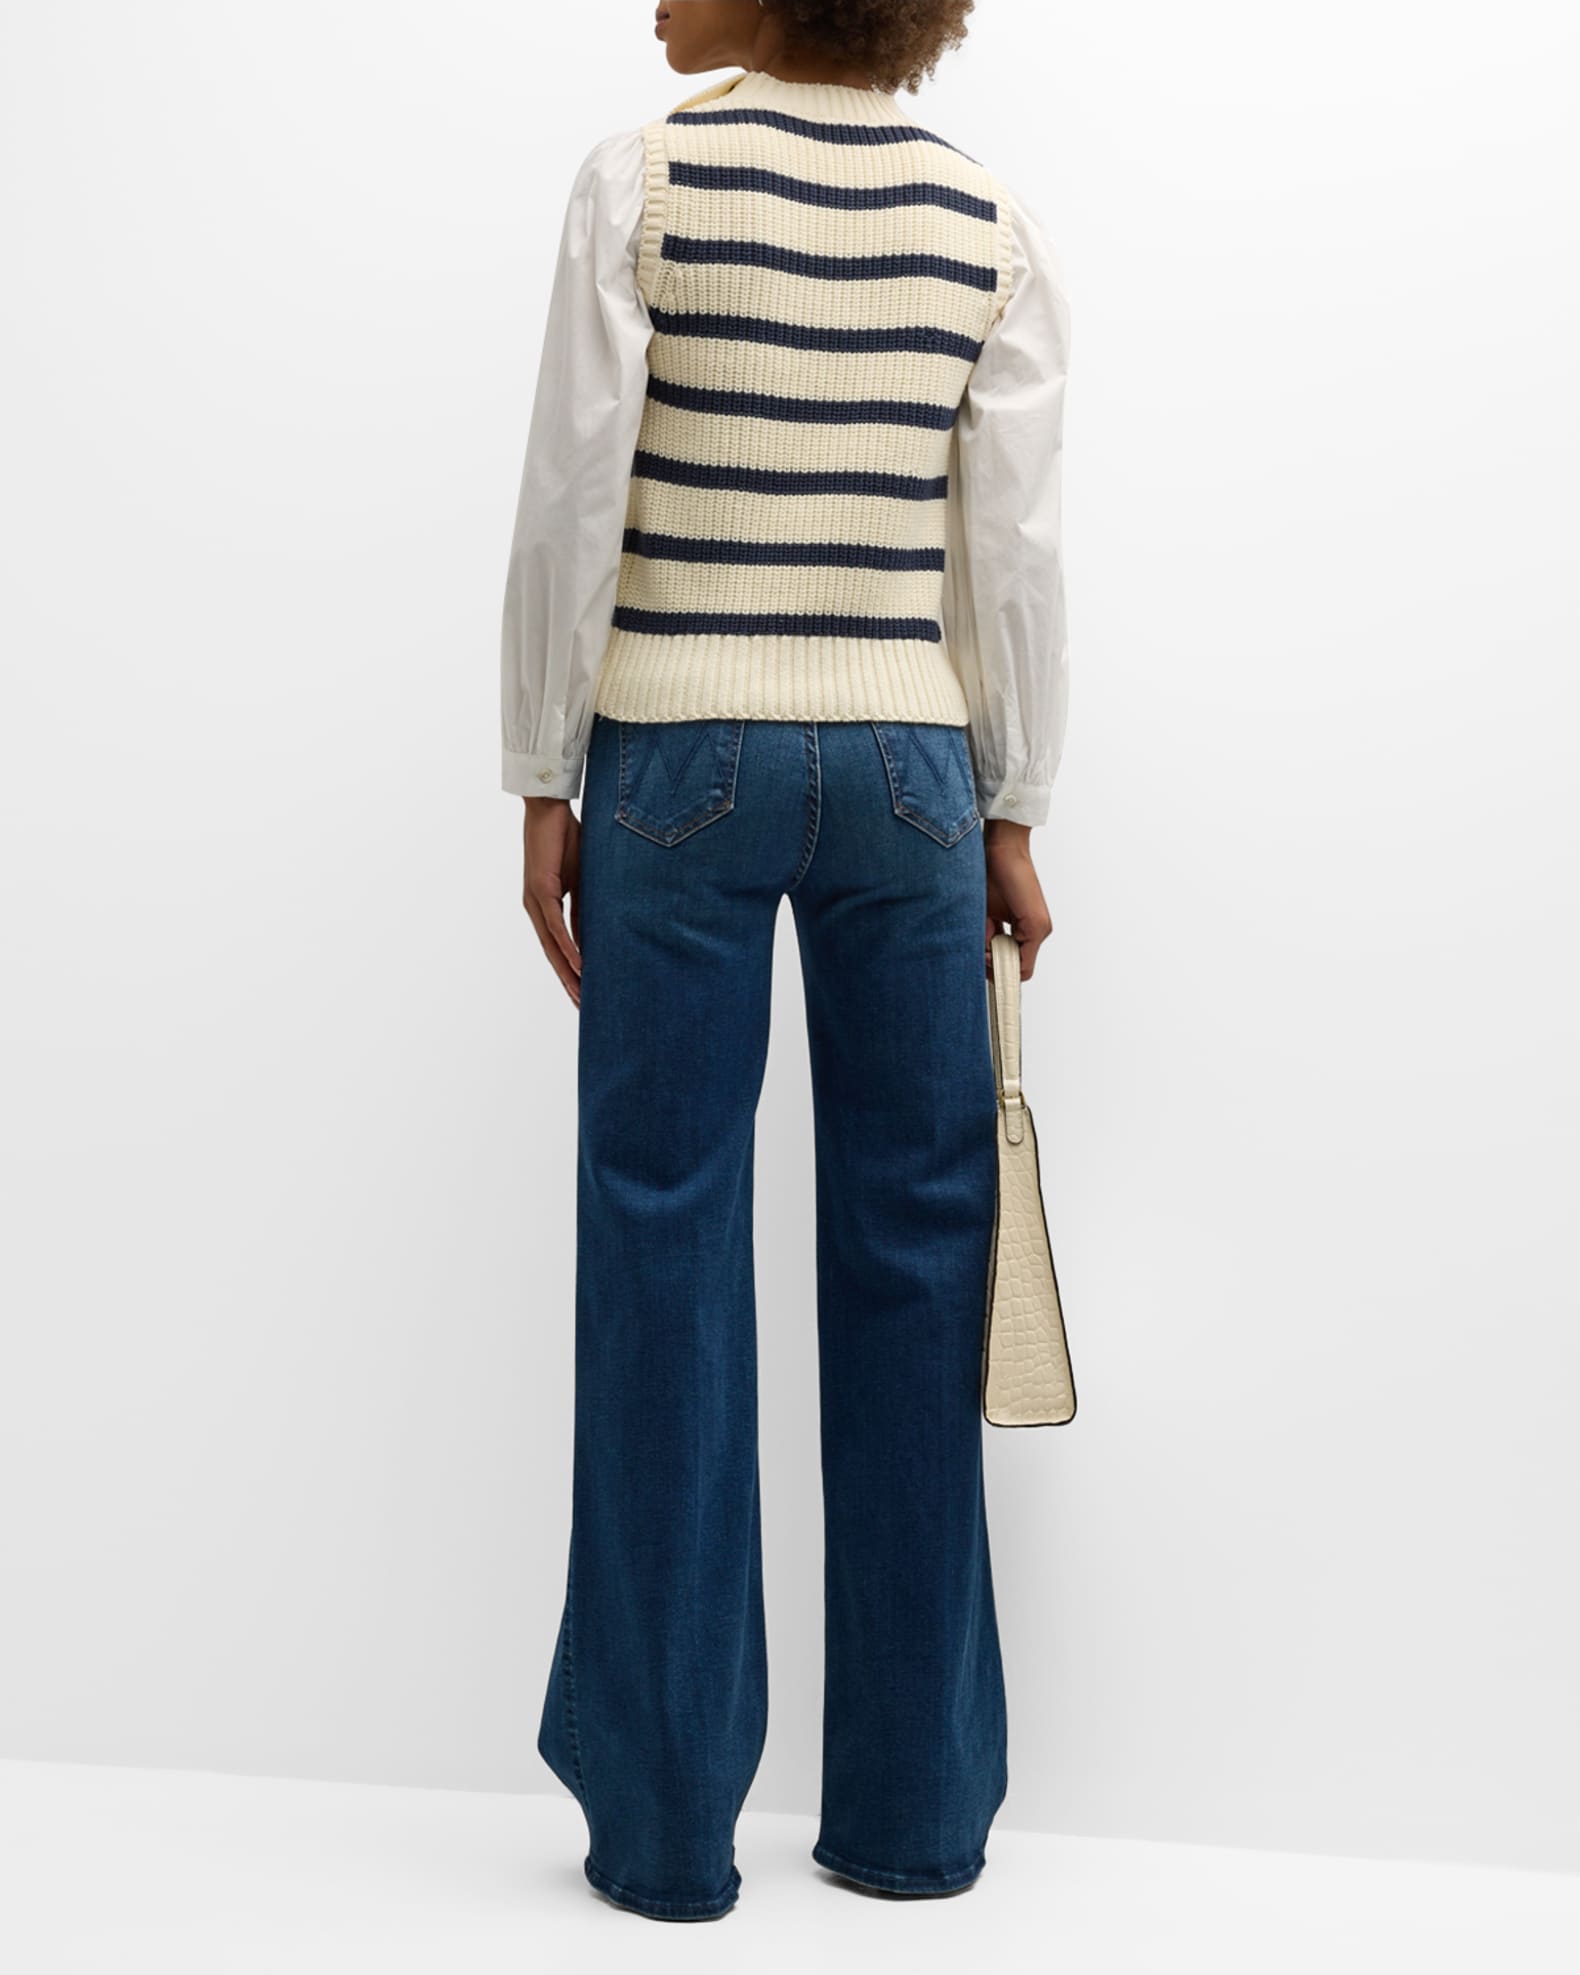 Rails Bambi Striped Sweater Vest with Contrasting Sleeves | Neiman Marcus